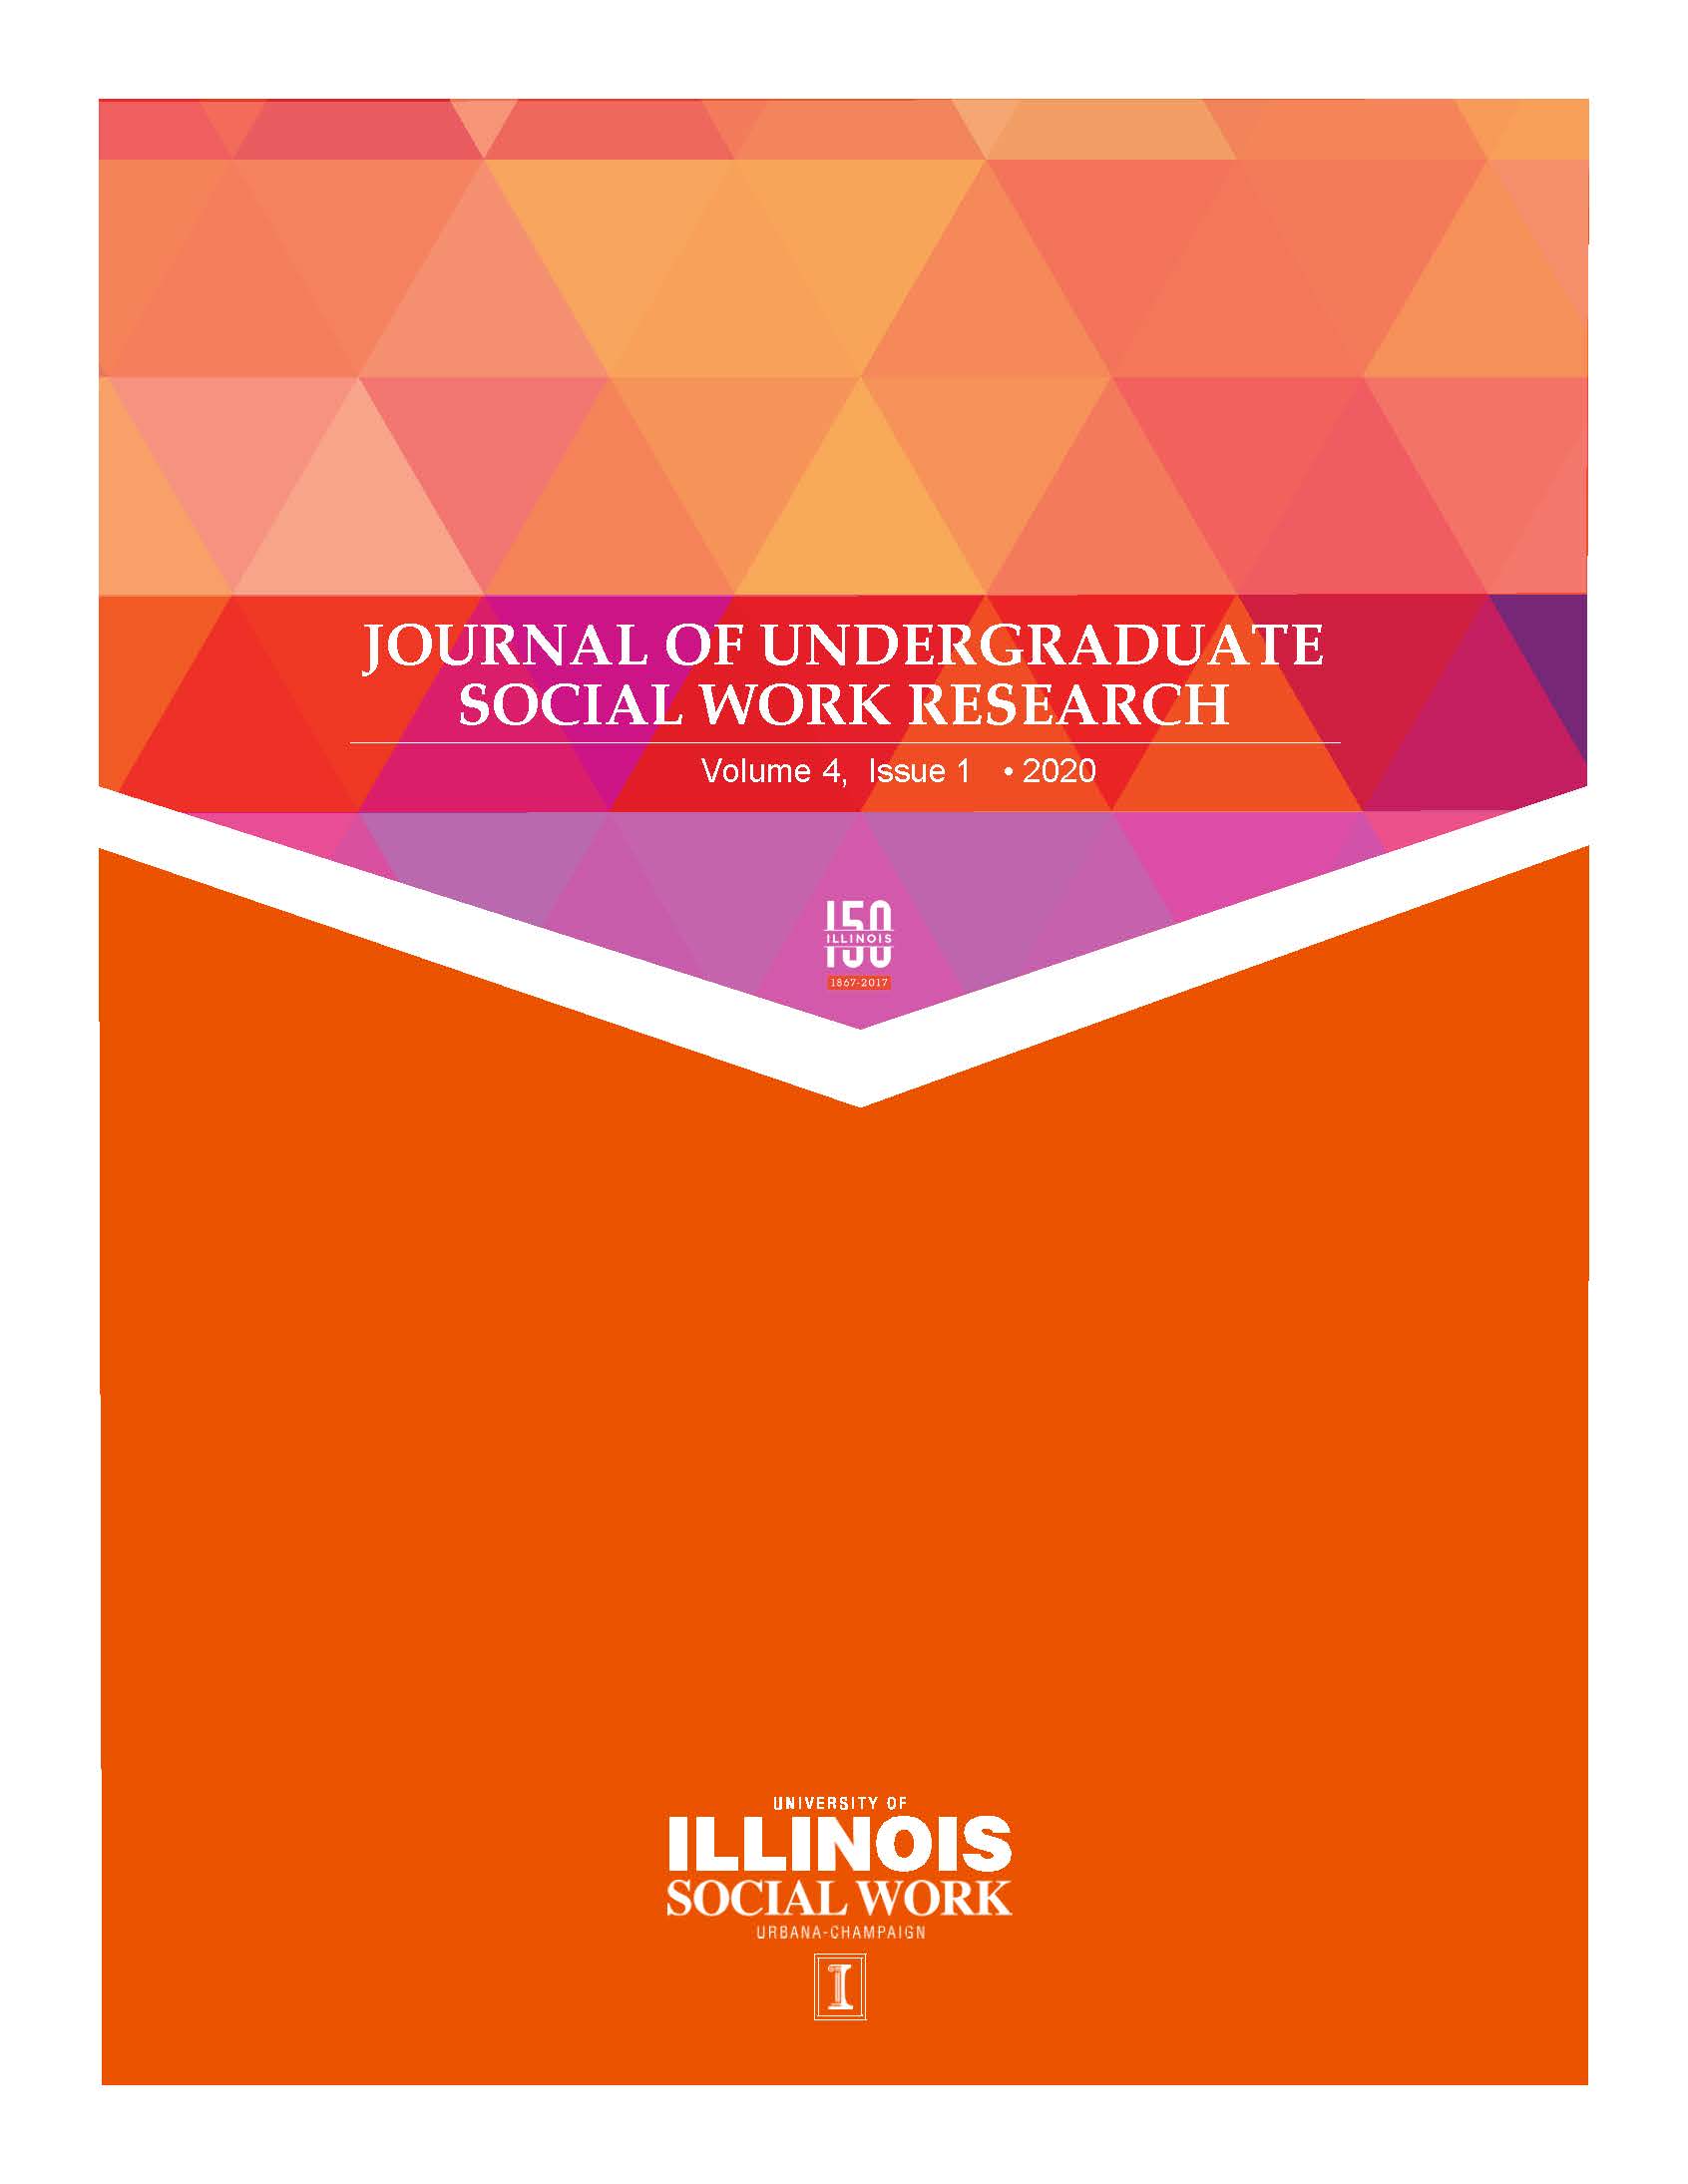 Journal of Undergraduate Social Work Research Vol 4, no. 1 cover with white font on orange background